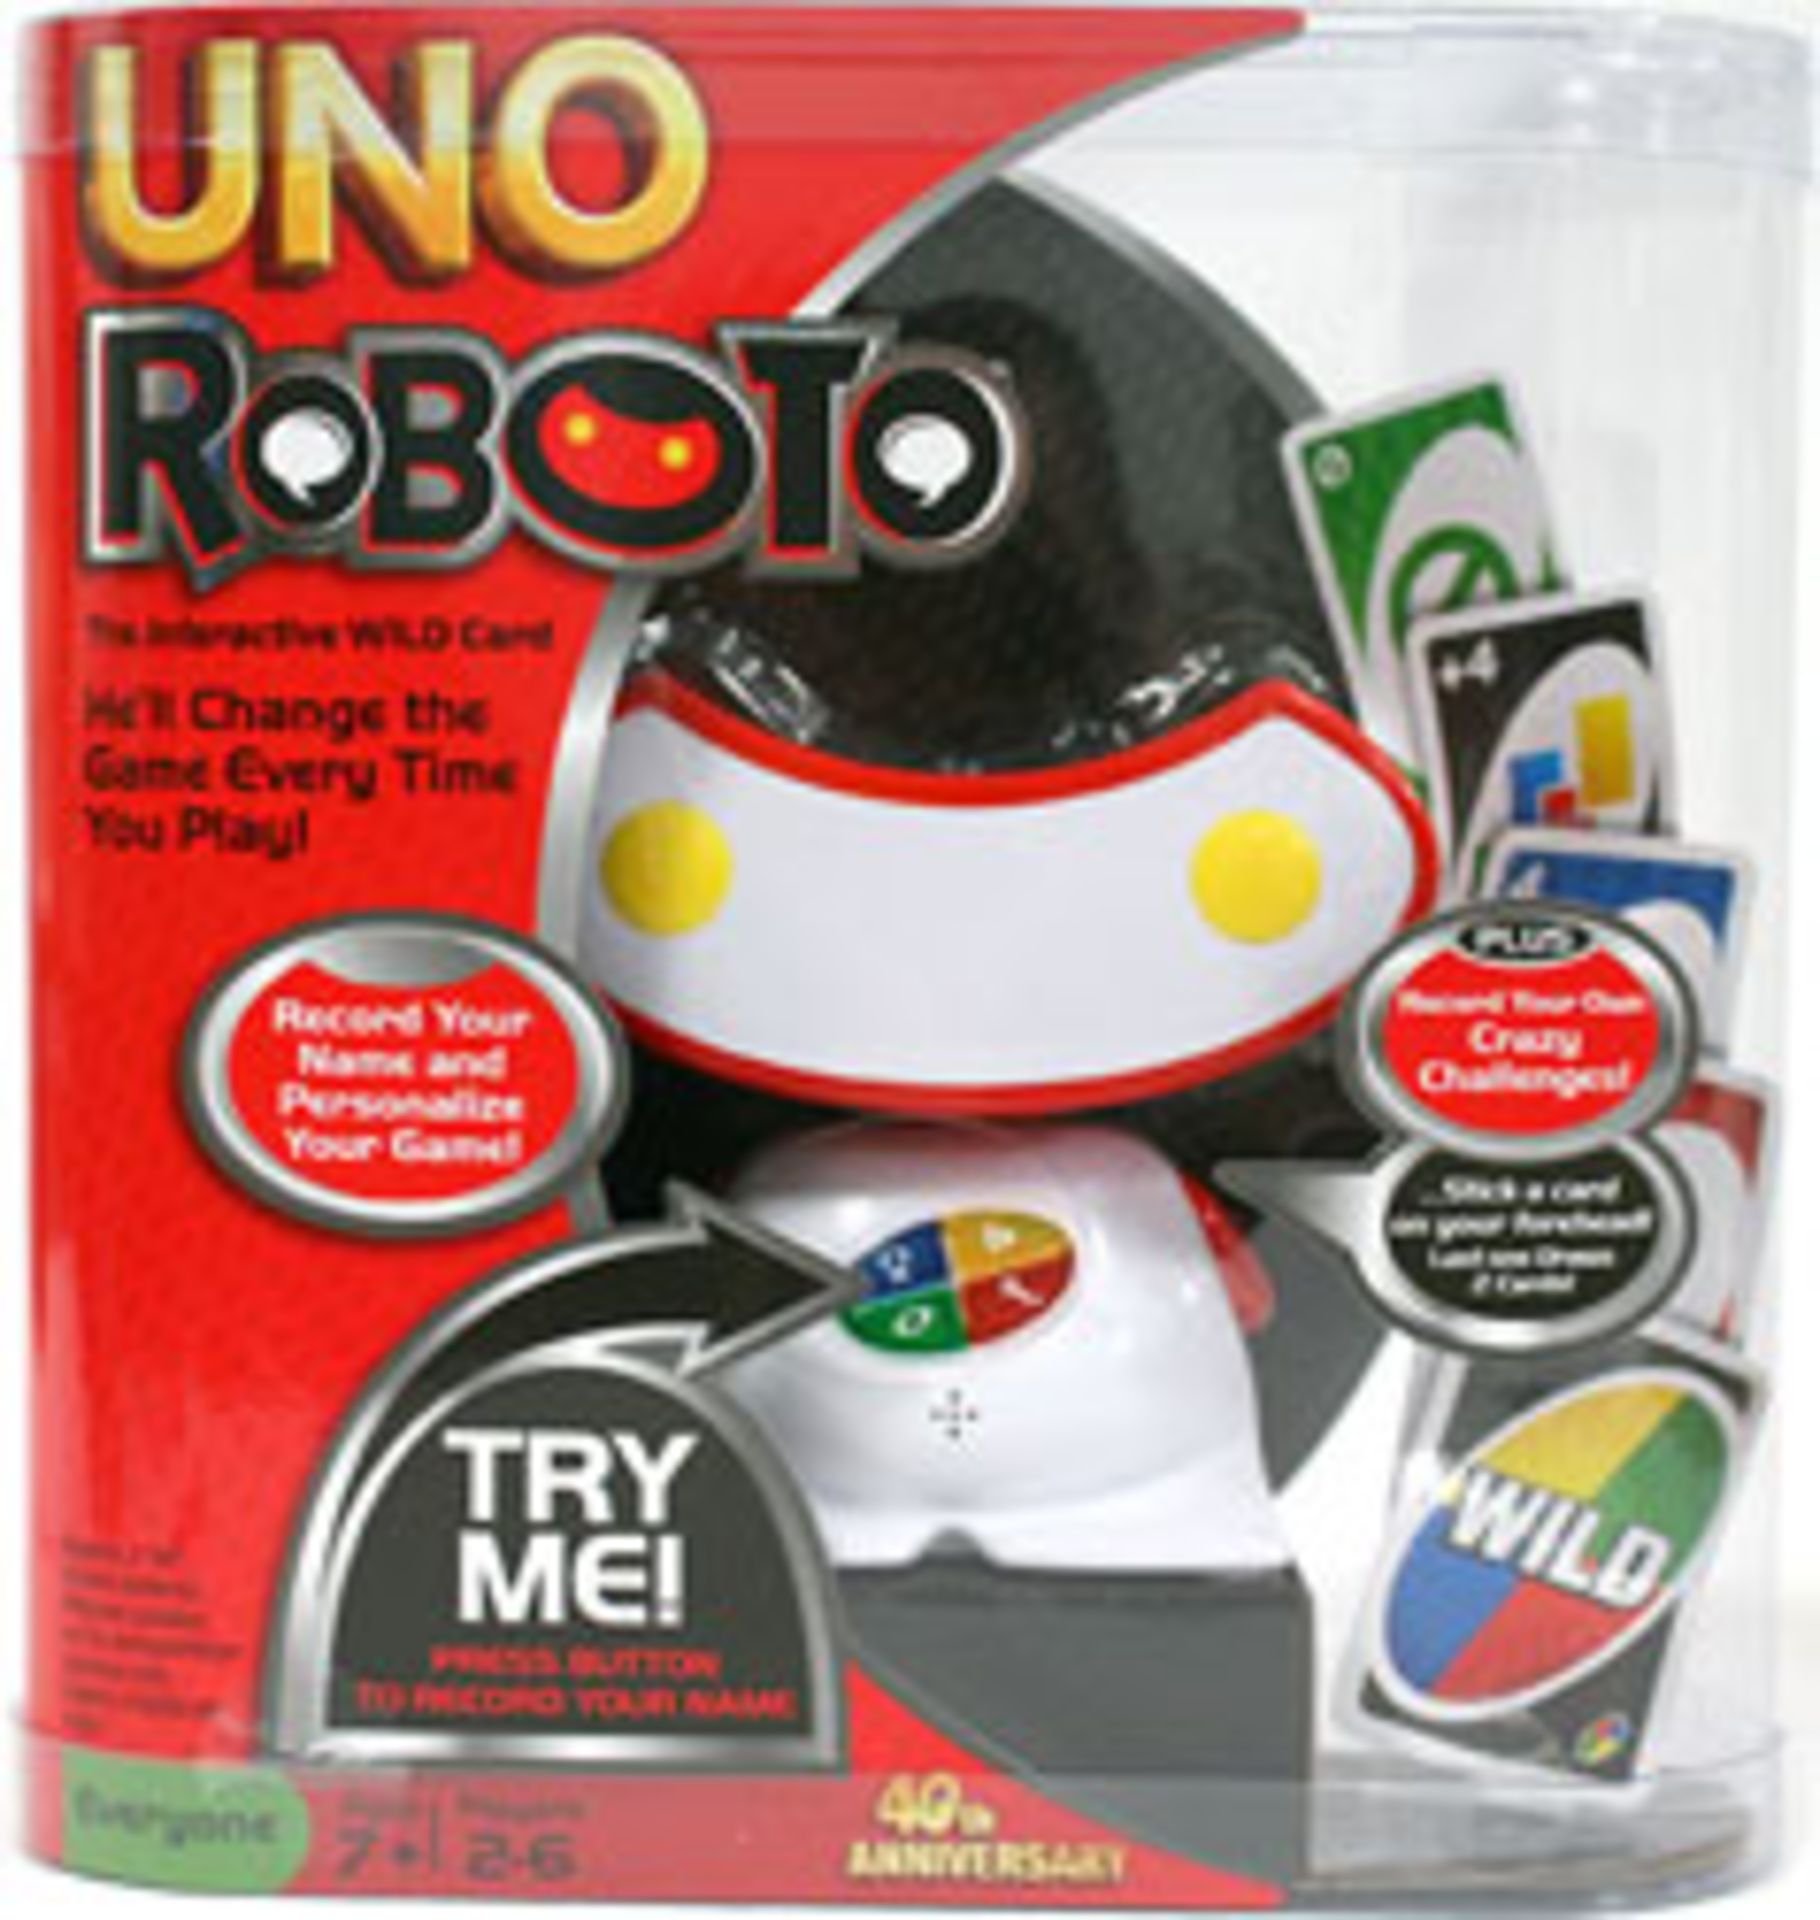 V Brand New UNO Roboto Game - The Interactive Wild Card - Personalise your Game by recording your - Image 2 of 2